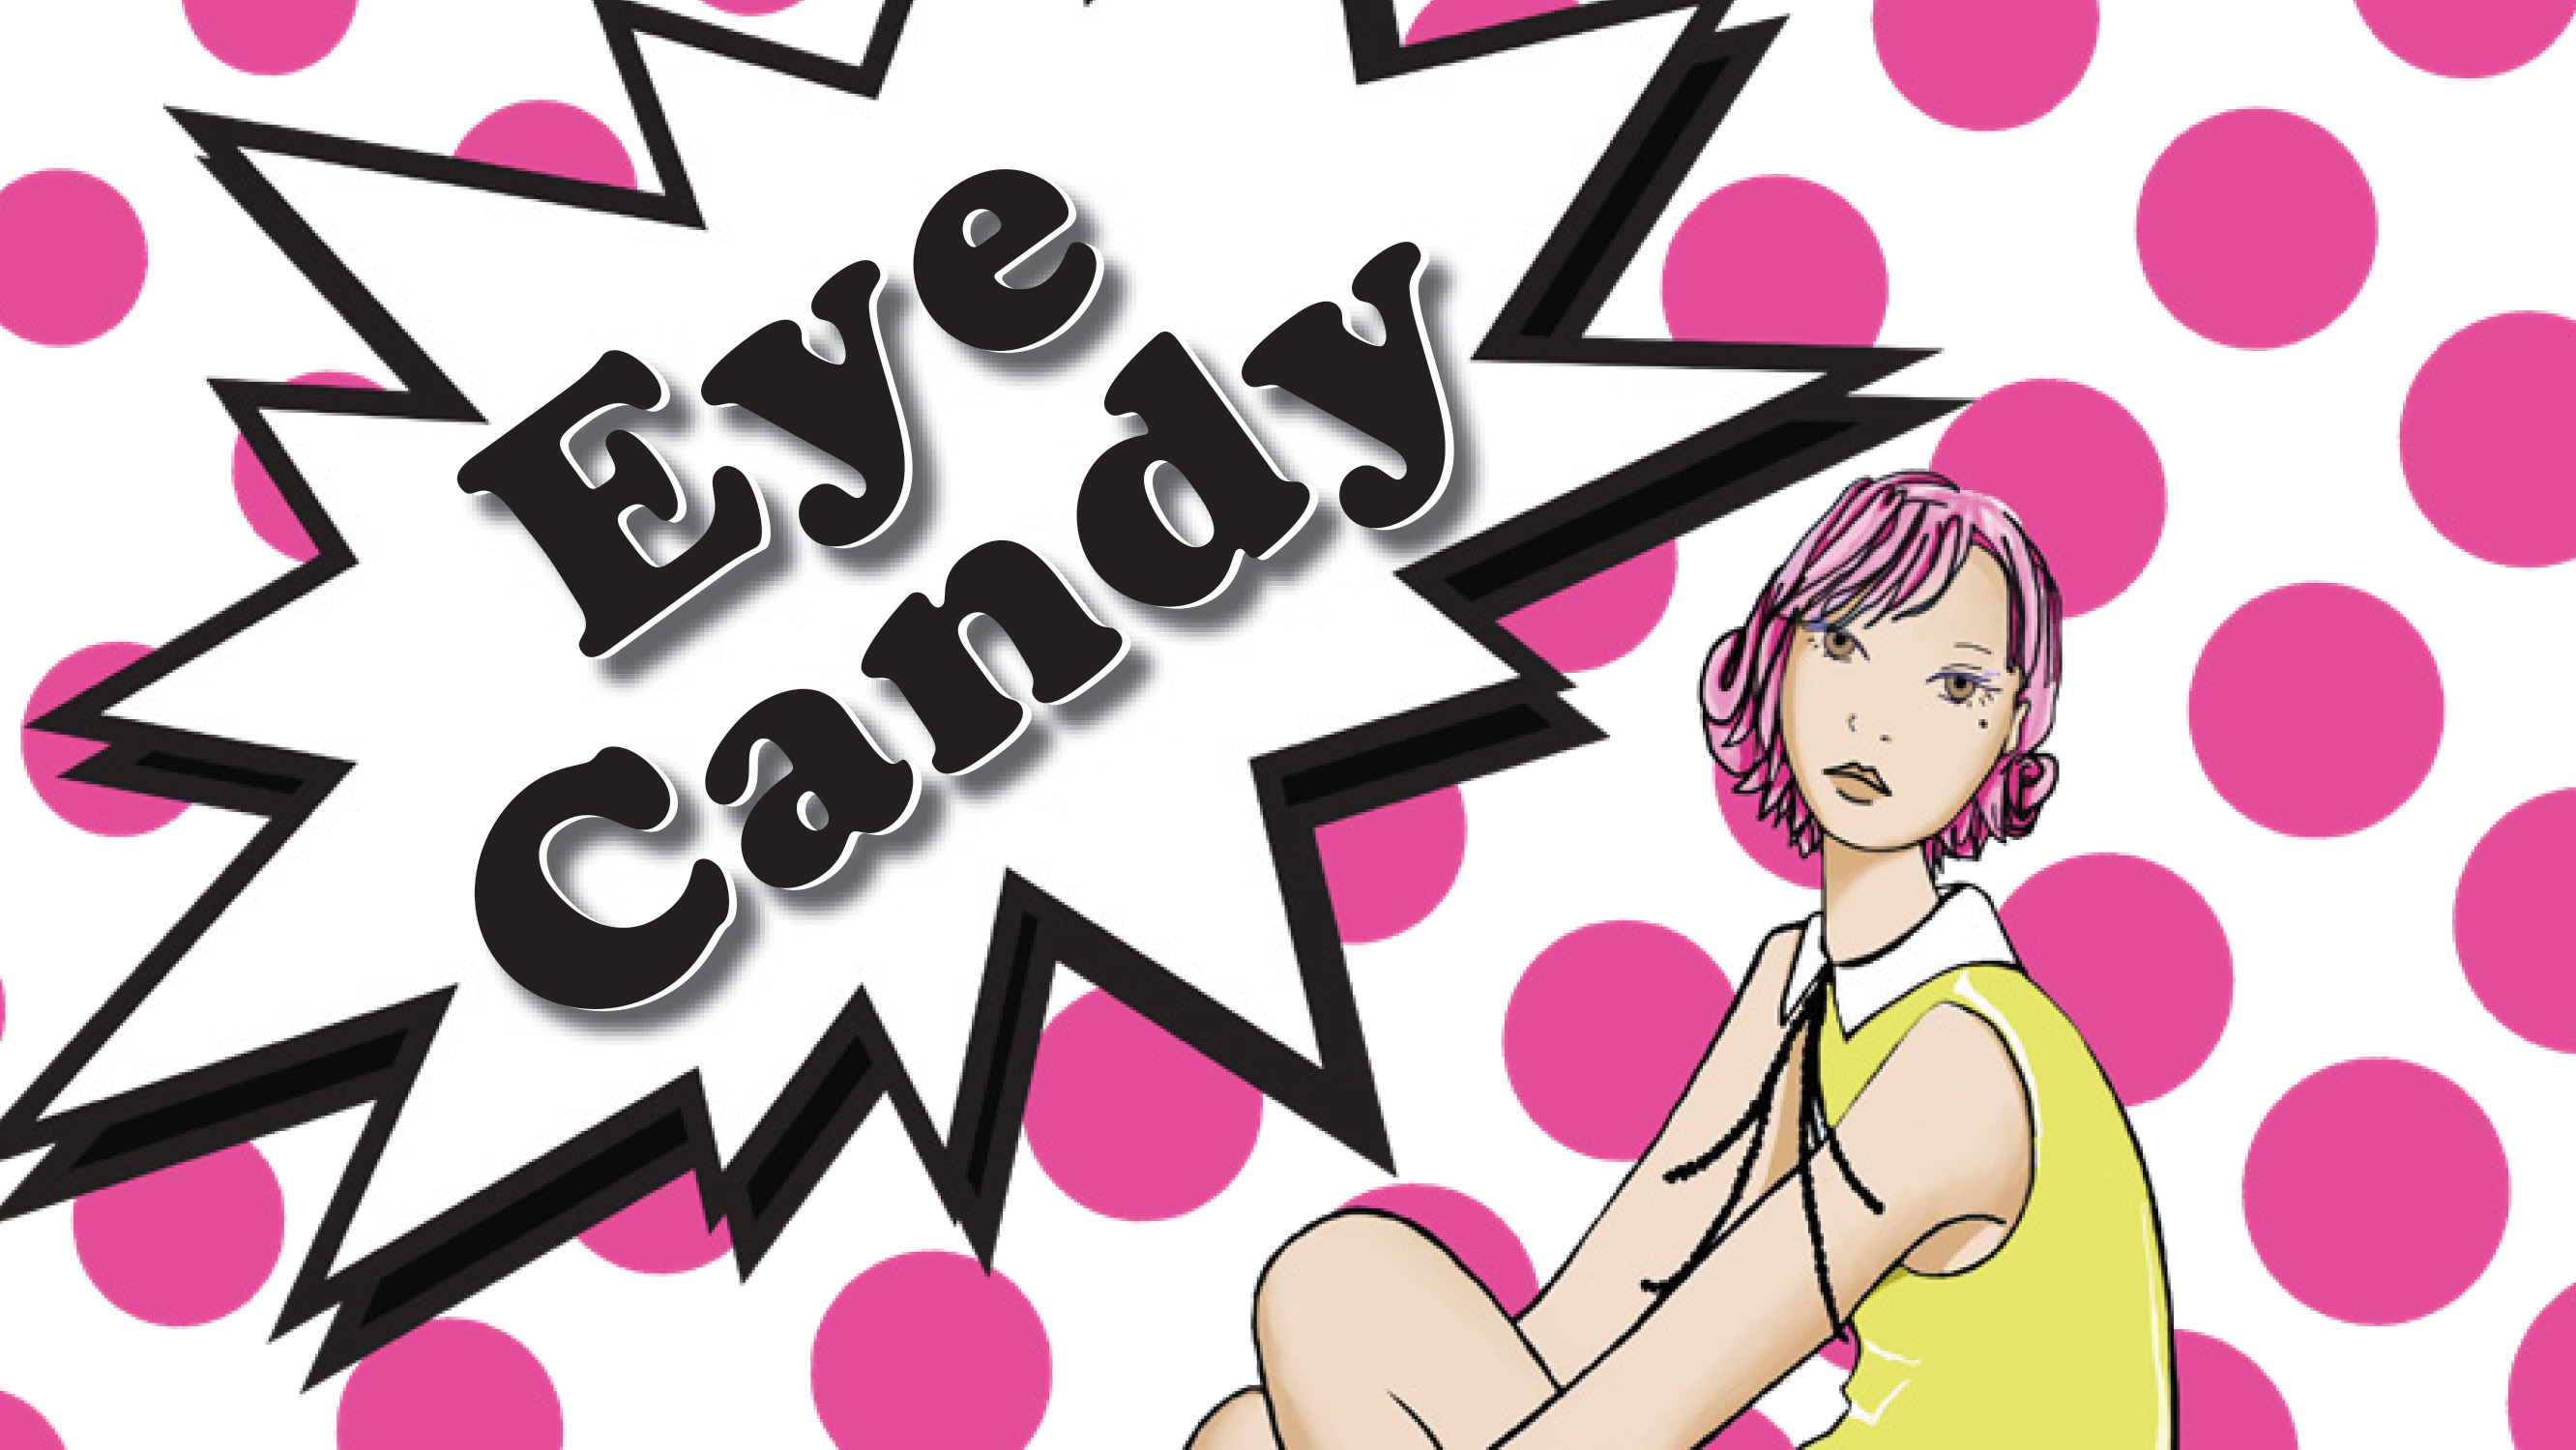 Cartoon image of a woman sitting down against a backdrop of pink polka dots. Words read Eye Candy